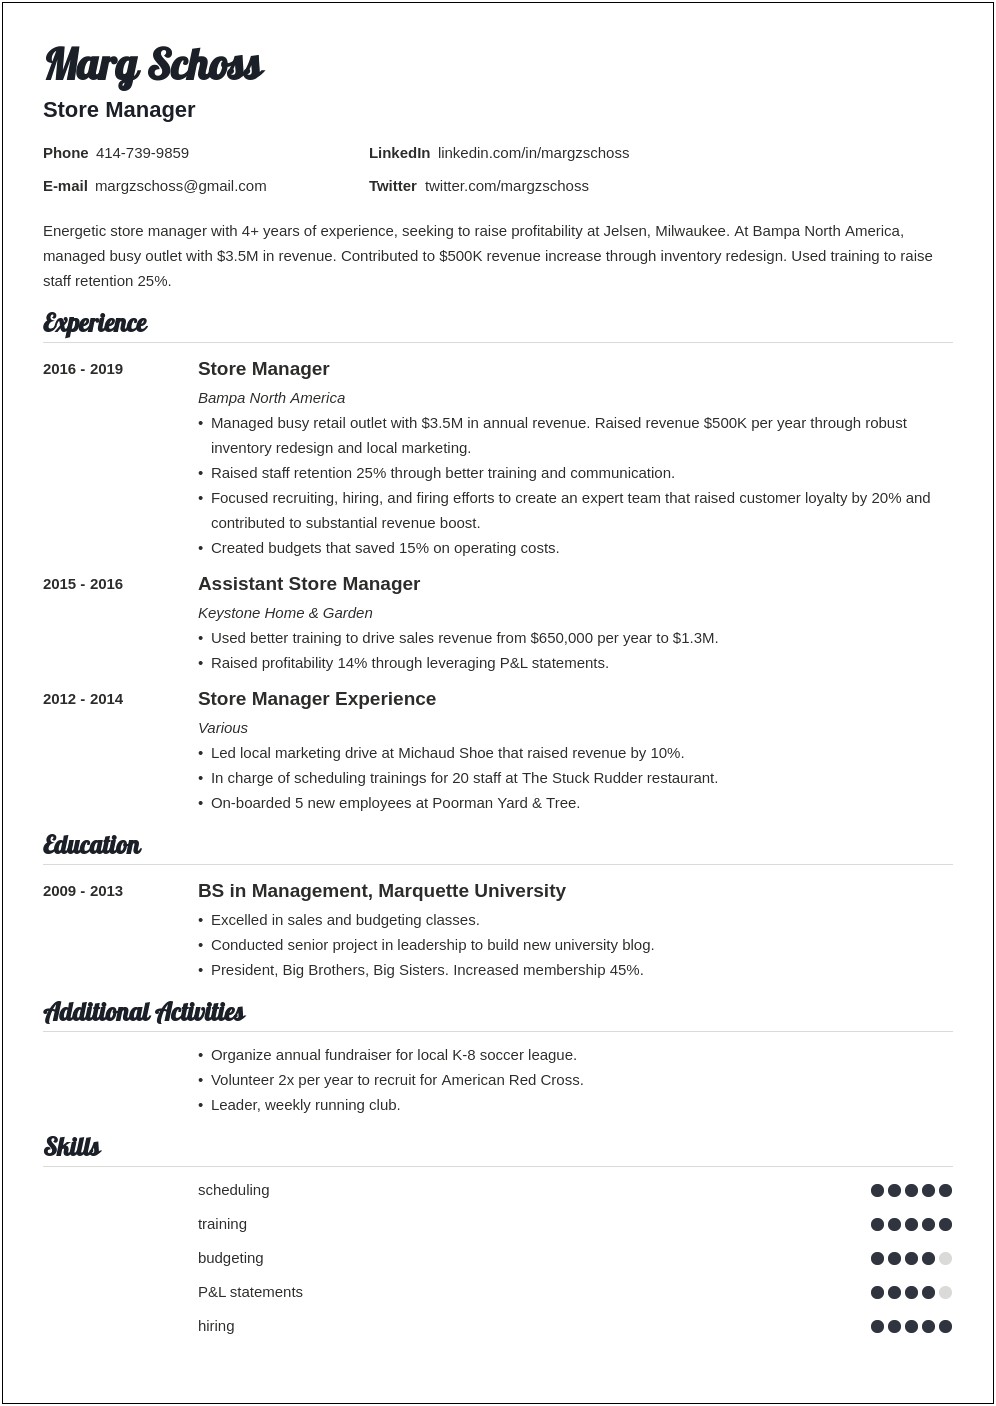 Store Manager Job Experience Resume